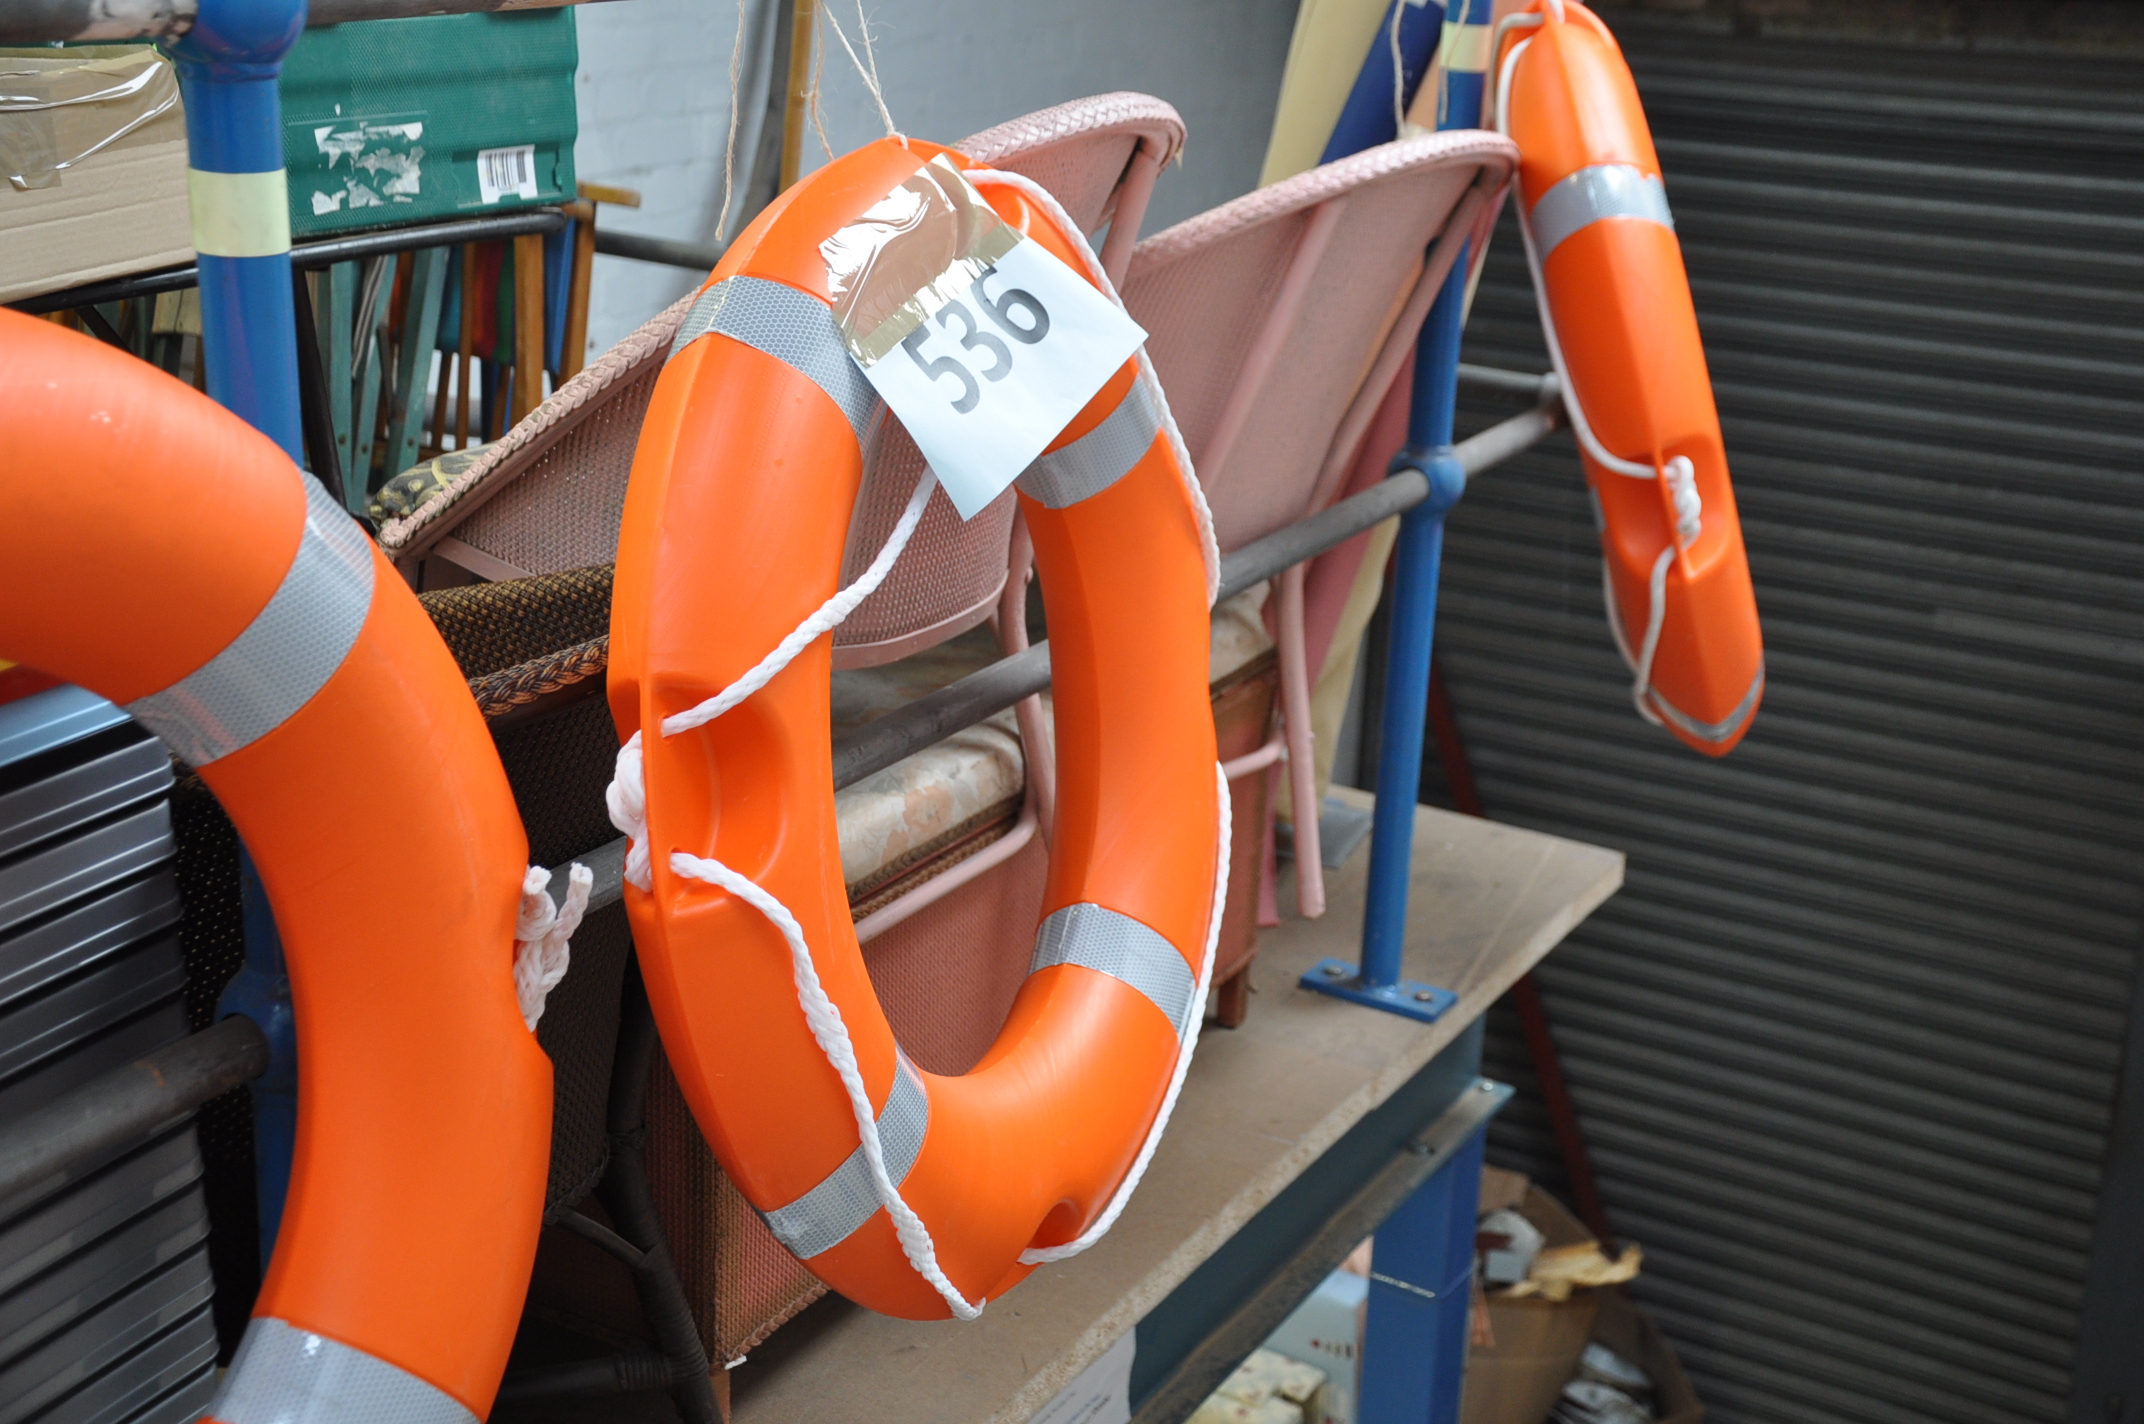 3 new unused boating life preserver buoys in orange with fluorescent ribbon trims.